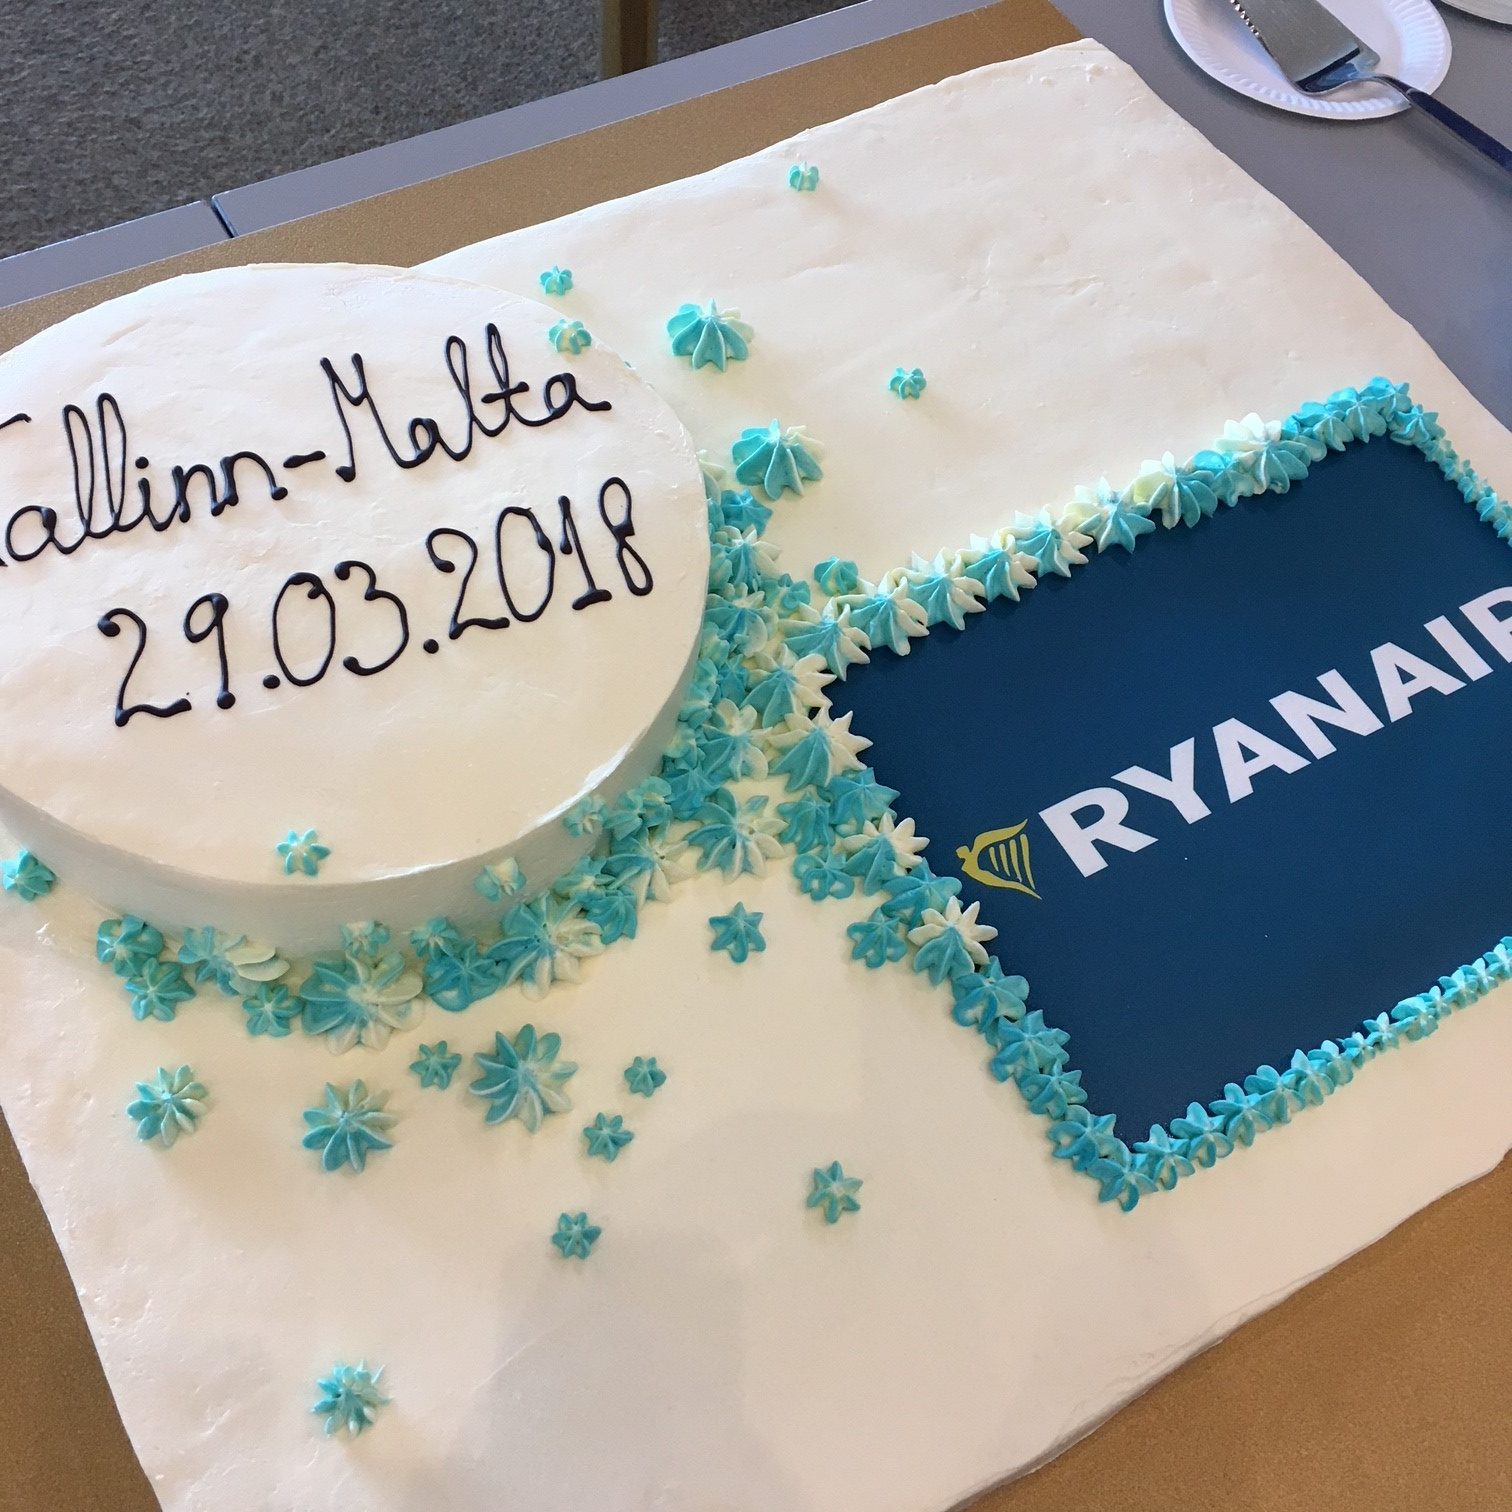 Ryanair’s First Estonian Summer Flights To Malta And Paphos Take Off